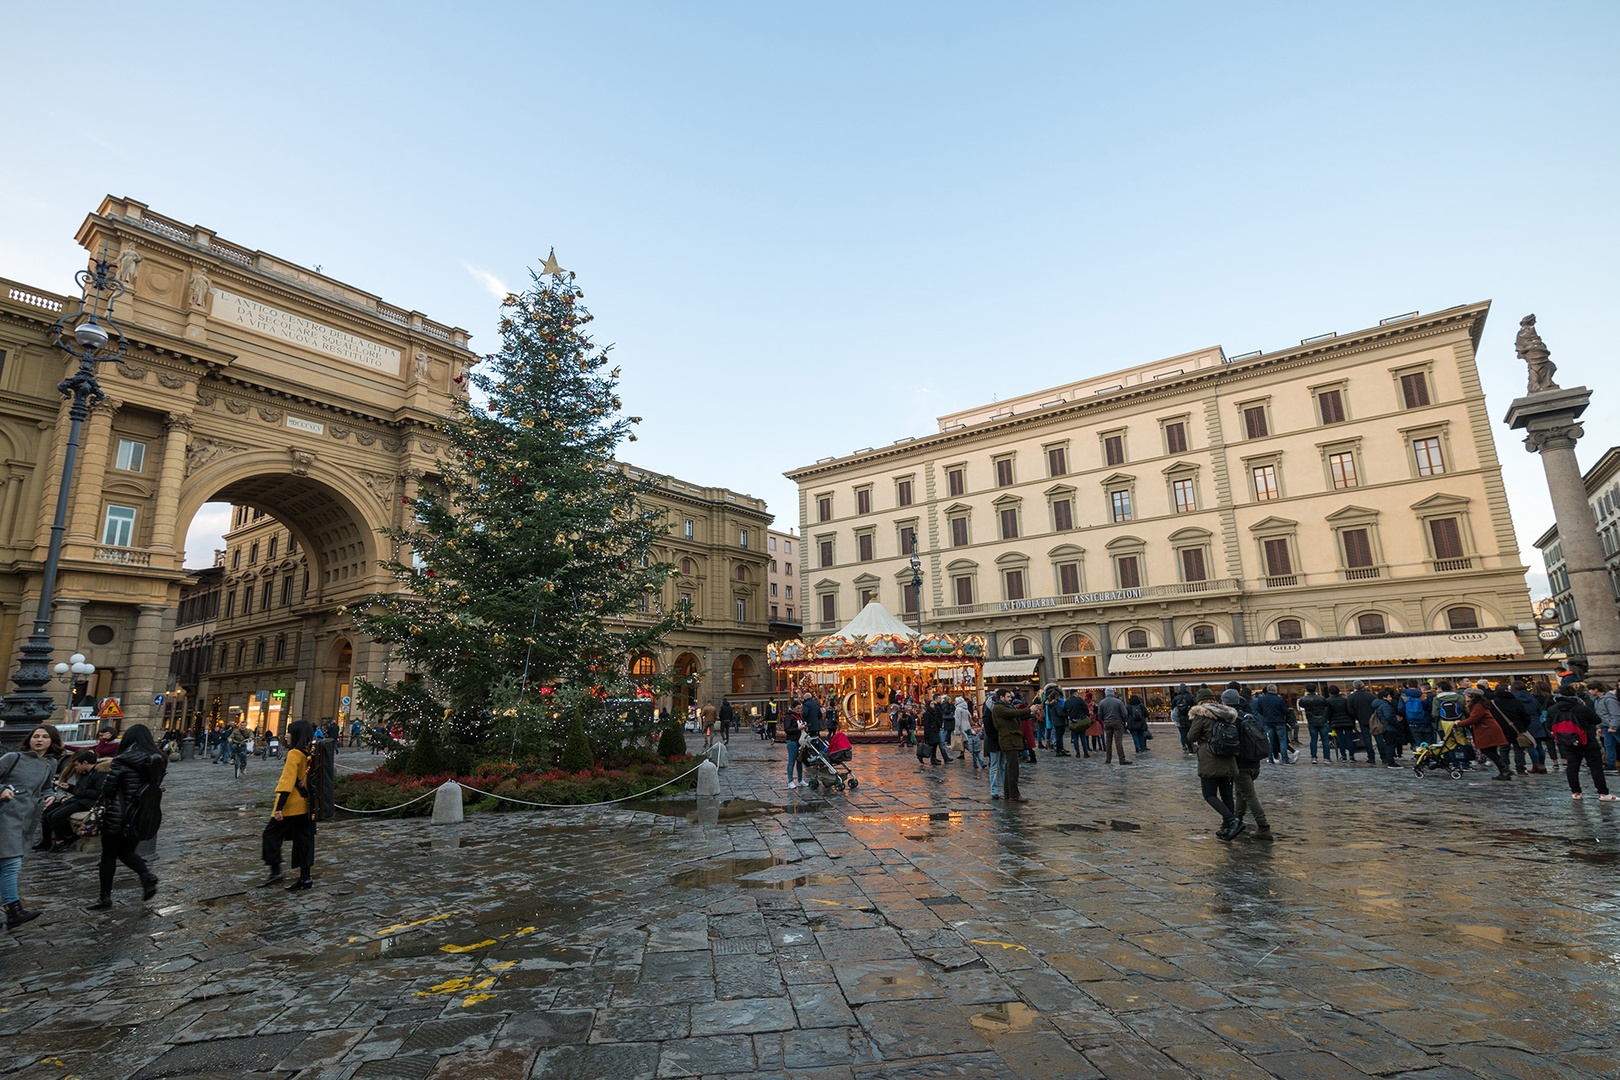 Piazza della Repubblica with its fine cafes, restaurants, merry-go-round & triumphal arch is nearby.